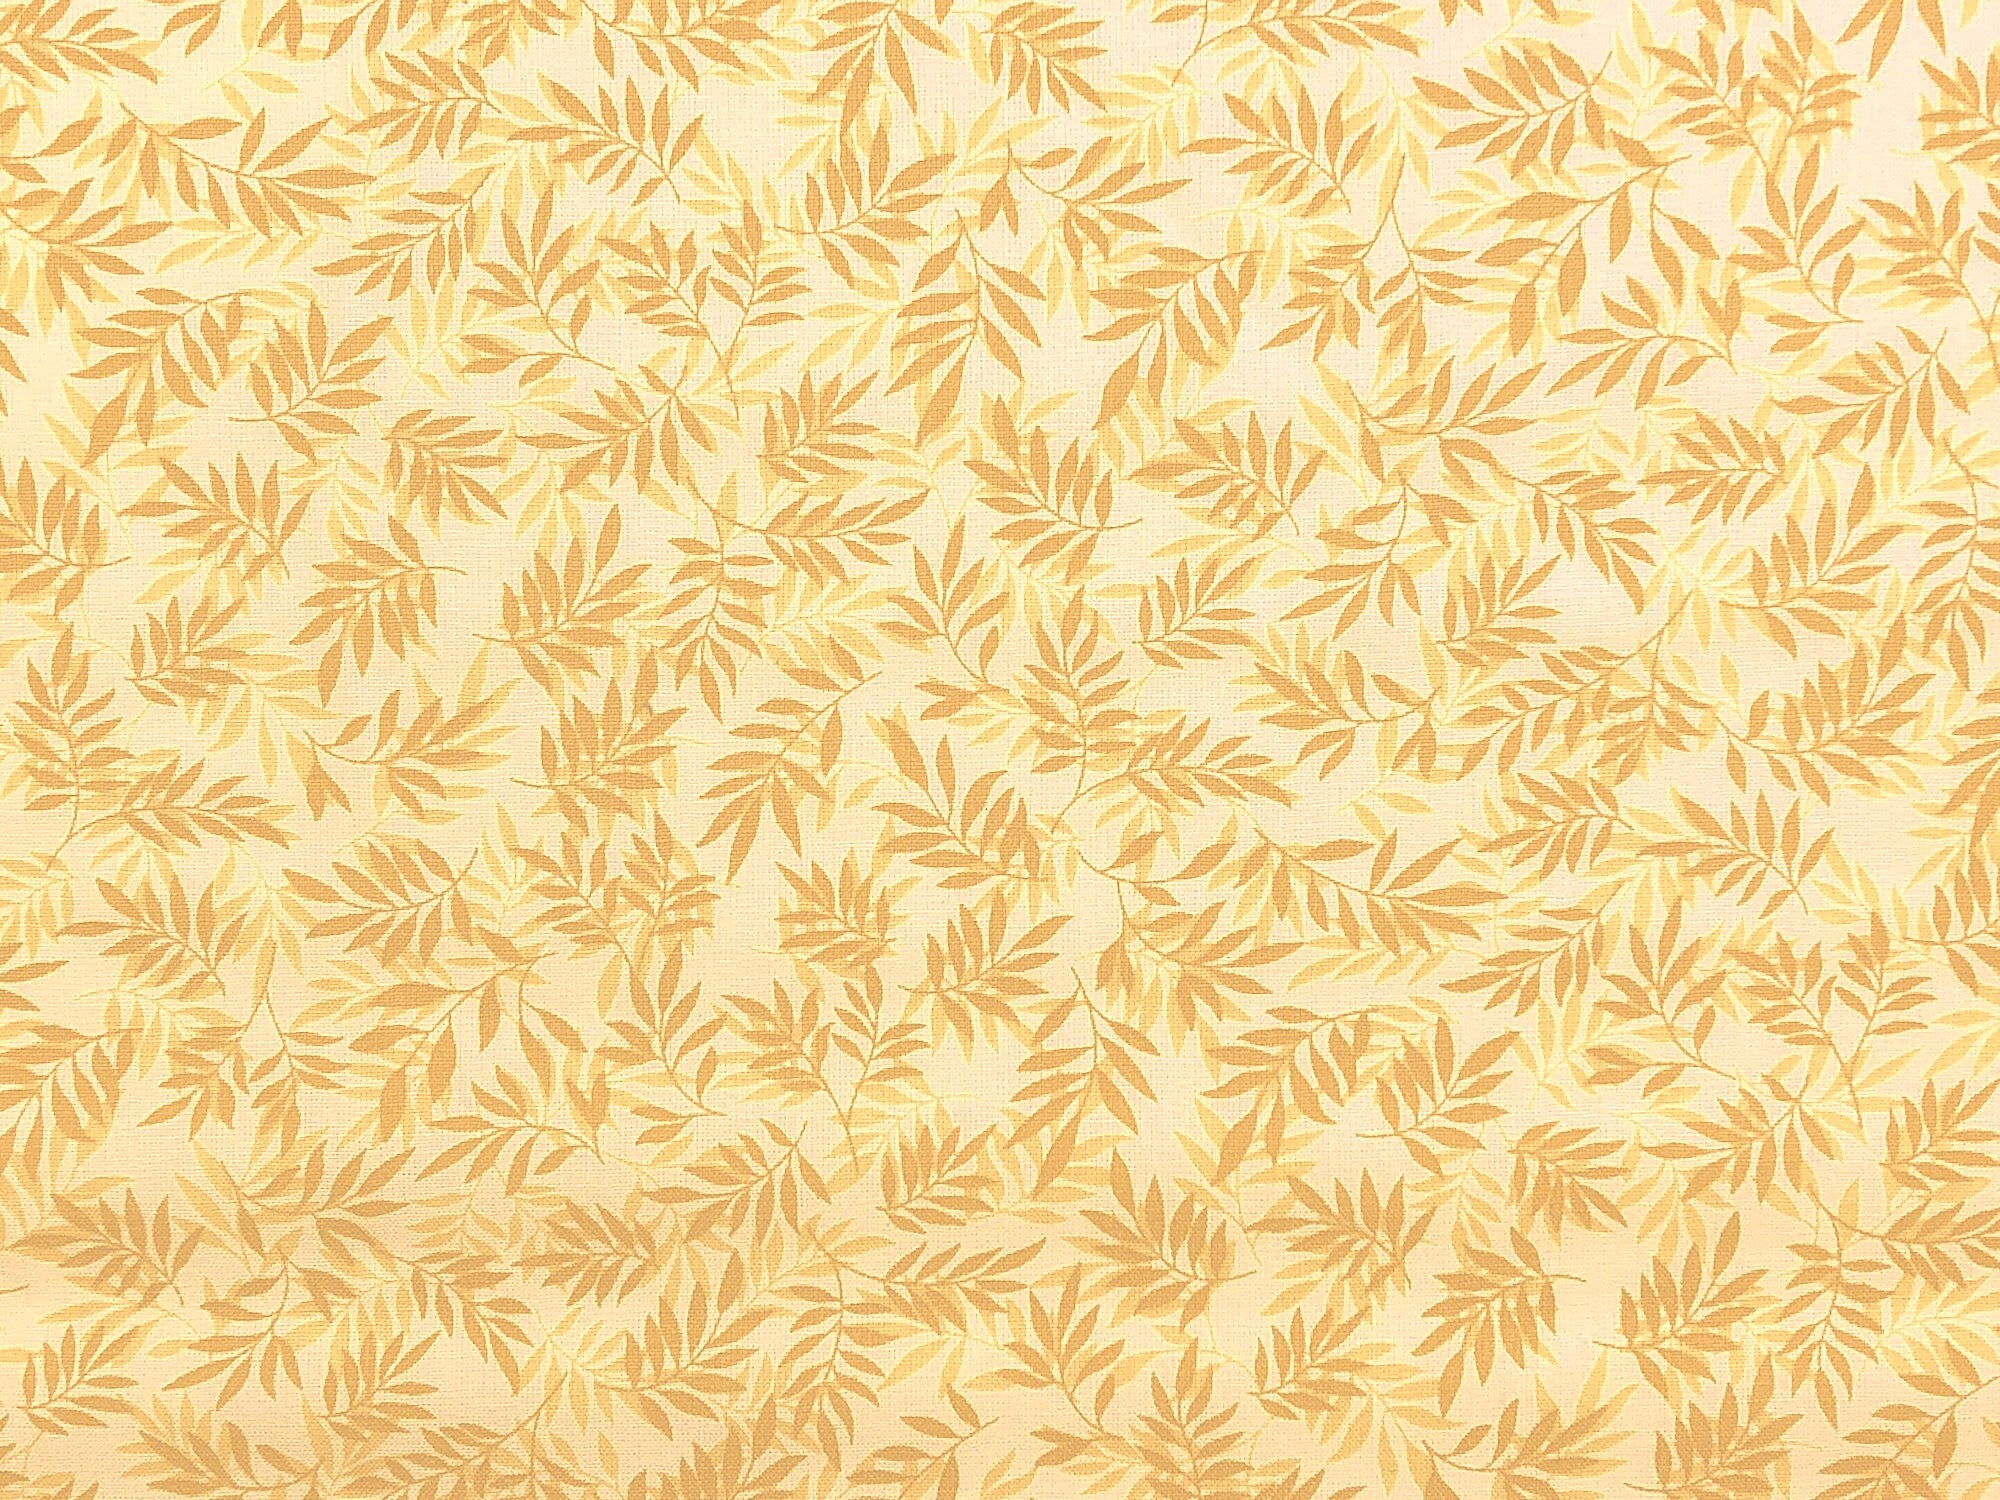 This fabric is called Sweden Vineyard and is covered with beige leaves. The background is very light yellow cream color